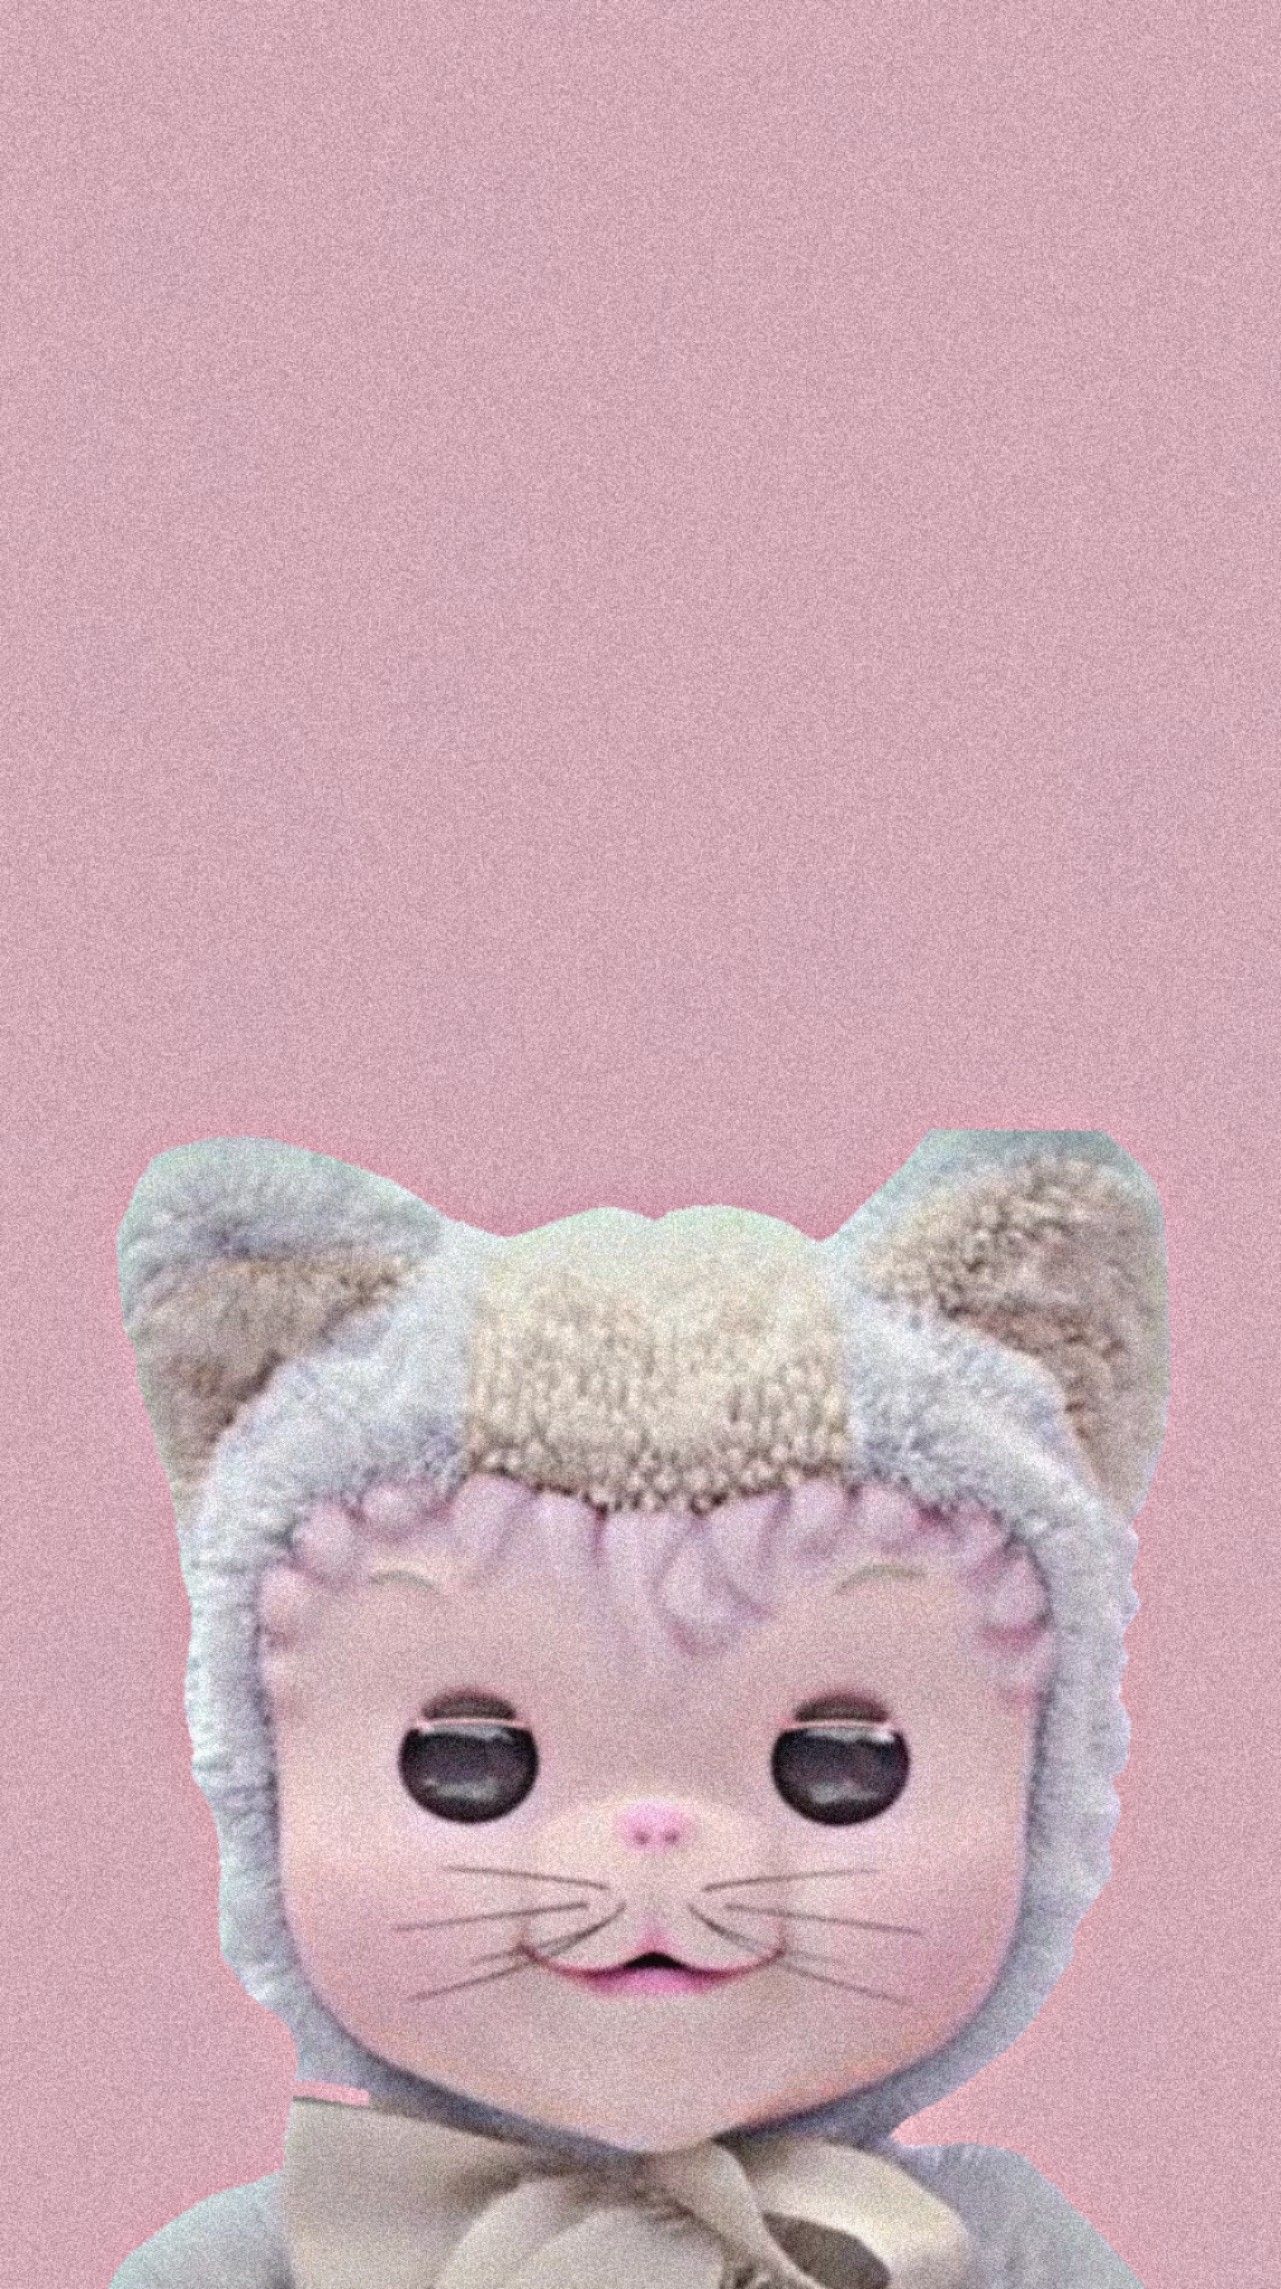 Play date wallpaper made by mine em 2020. Melanie martinez, Indie, Cantores